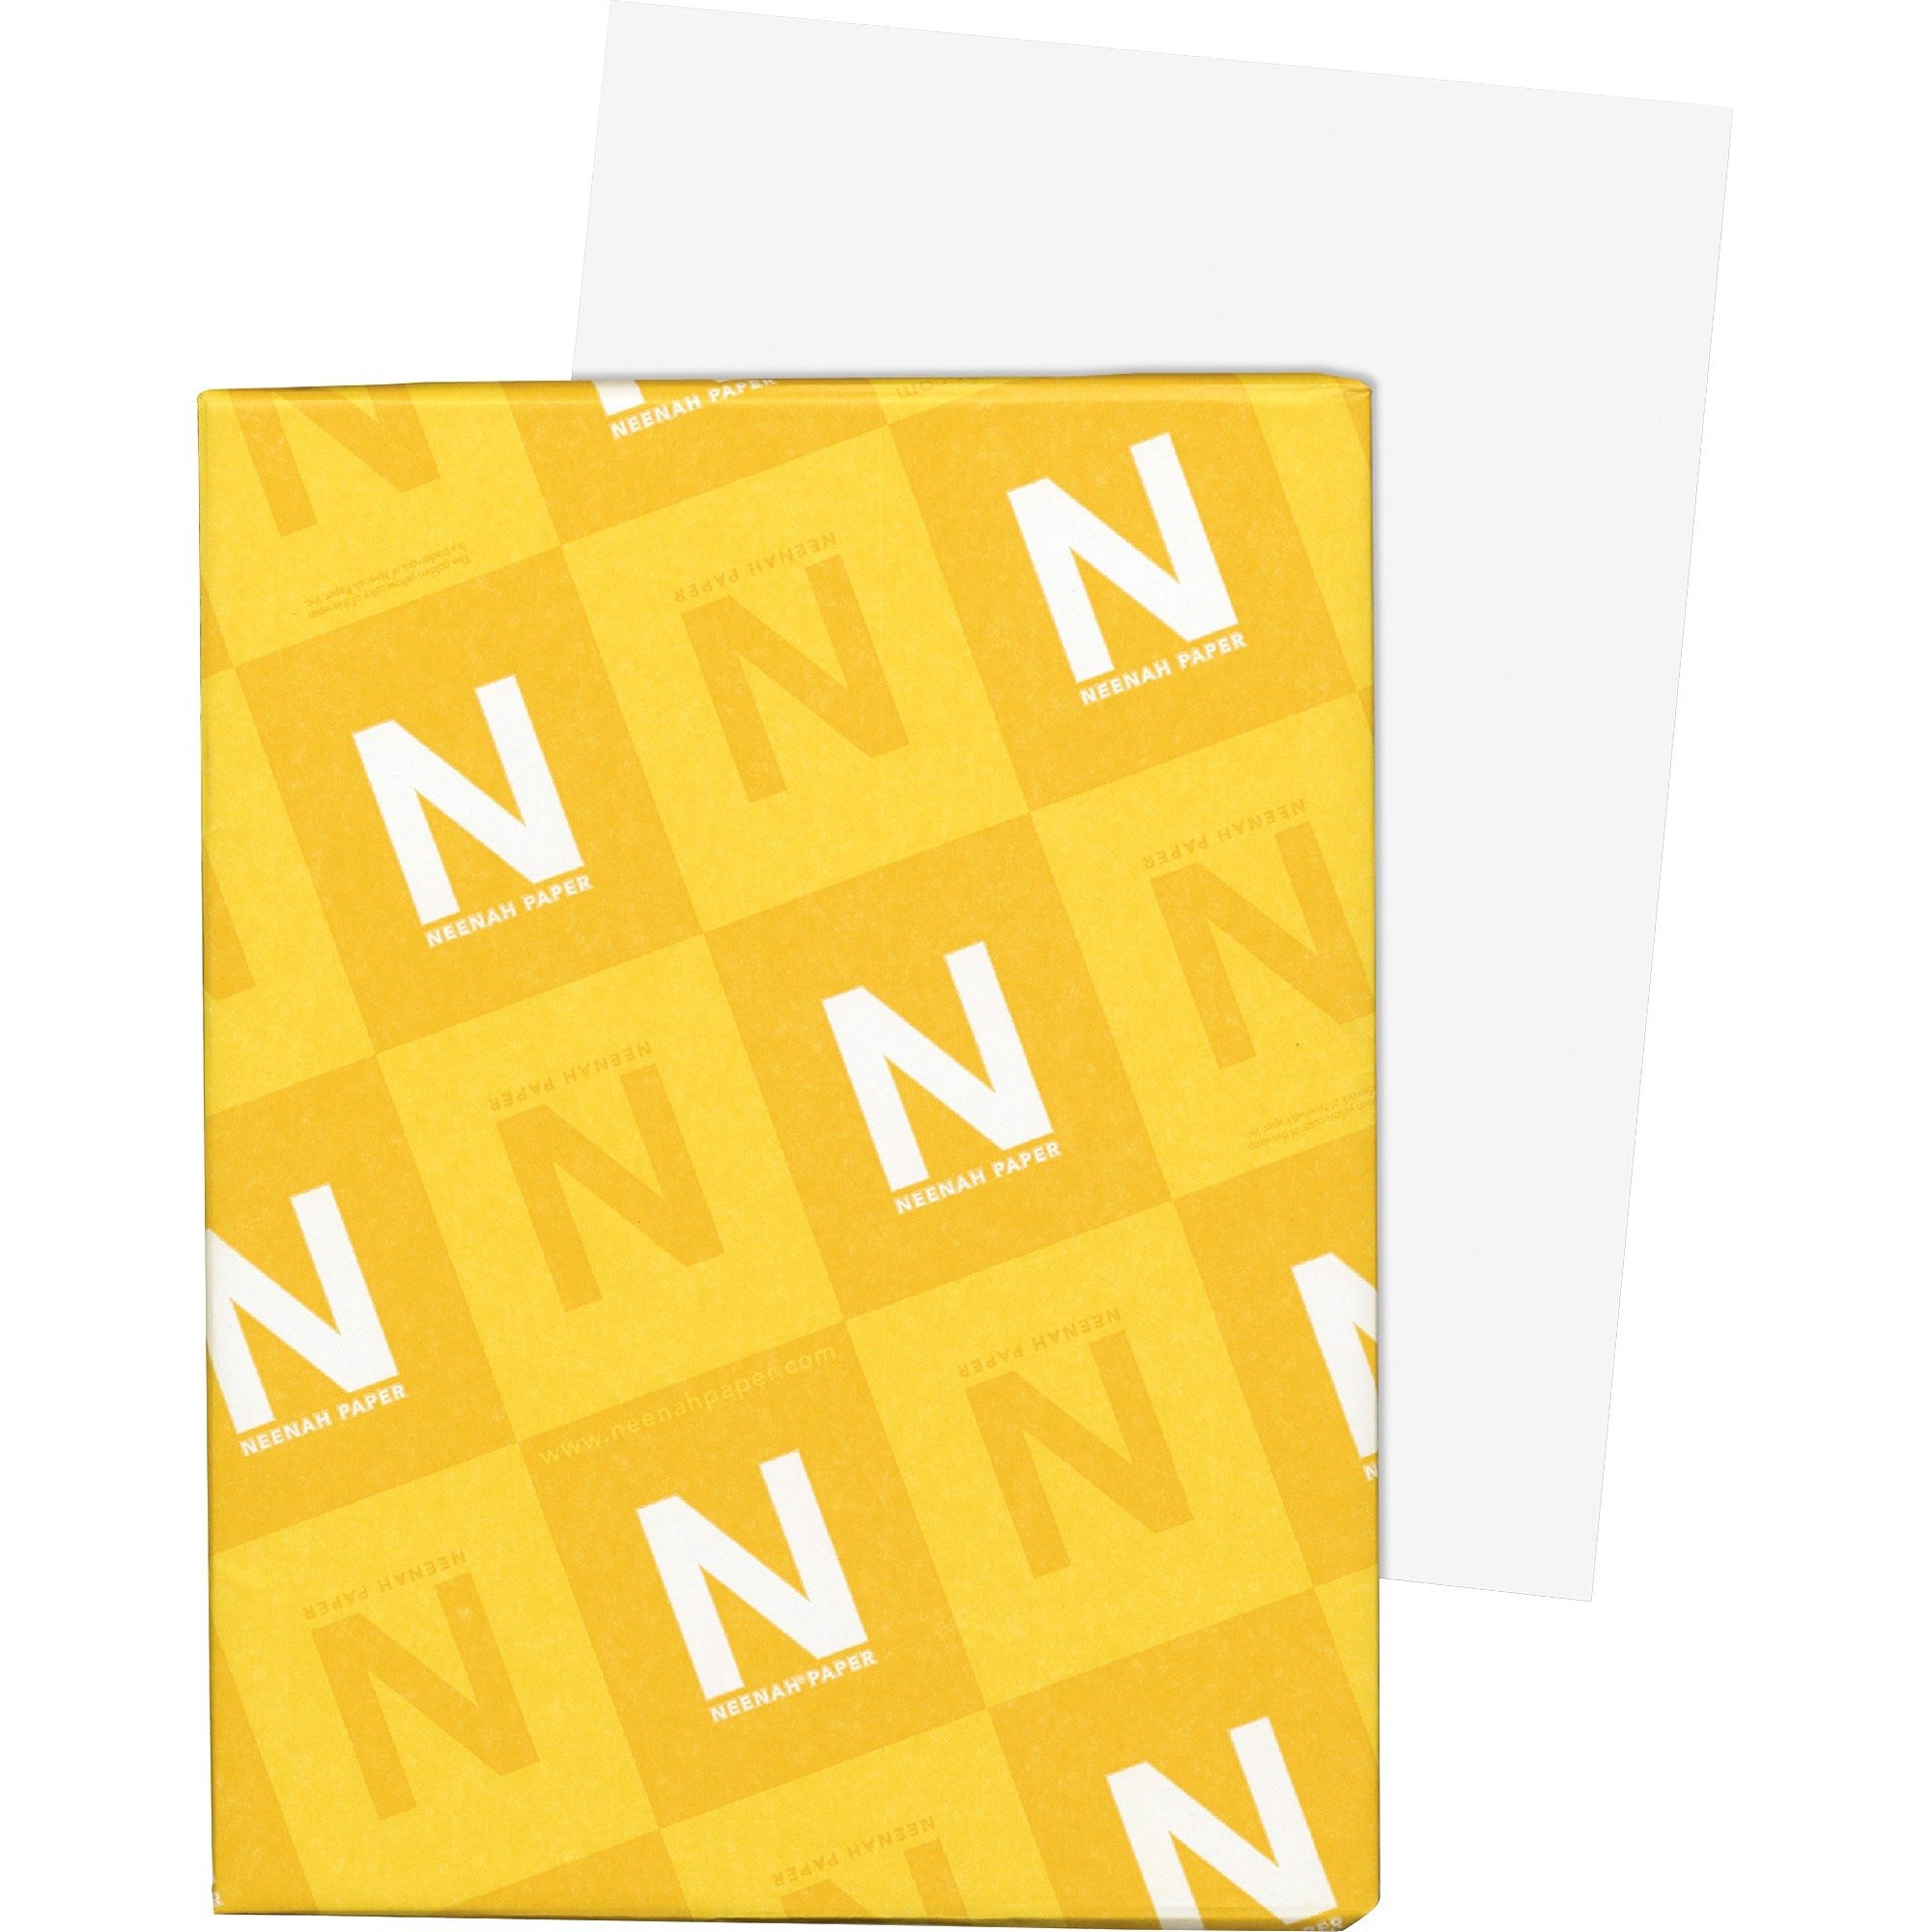 Card Stock 8.5 x 11 - 110 Ibs - Recycled - 30% Recycled Content - Smooth - 94 Brightness , White- 250/Pack